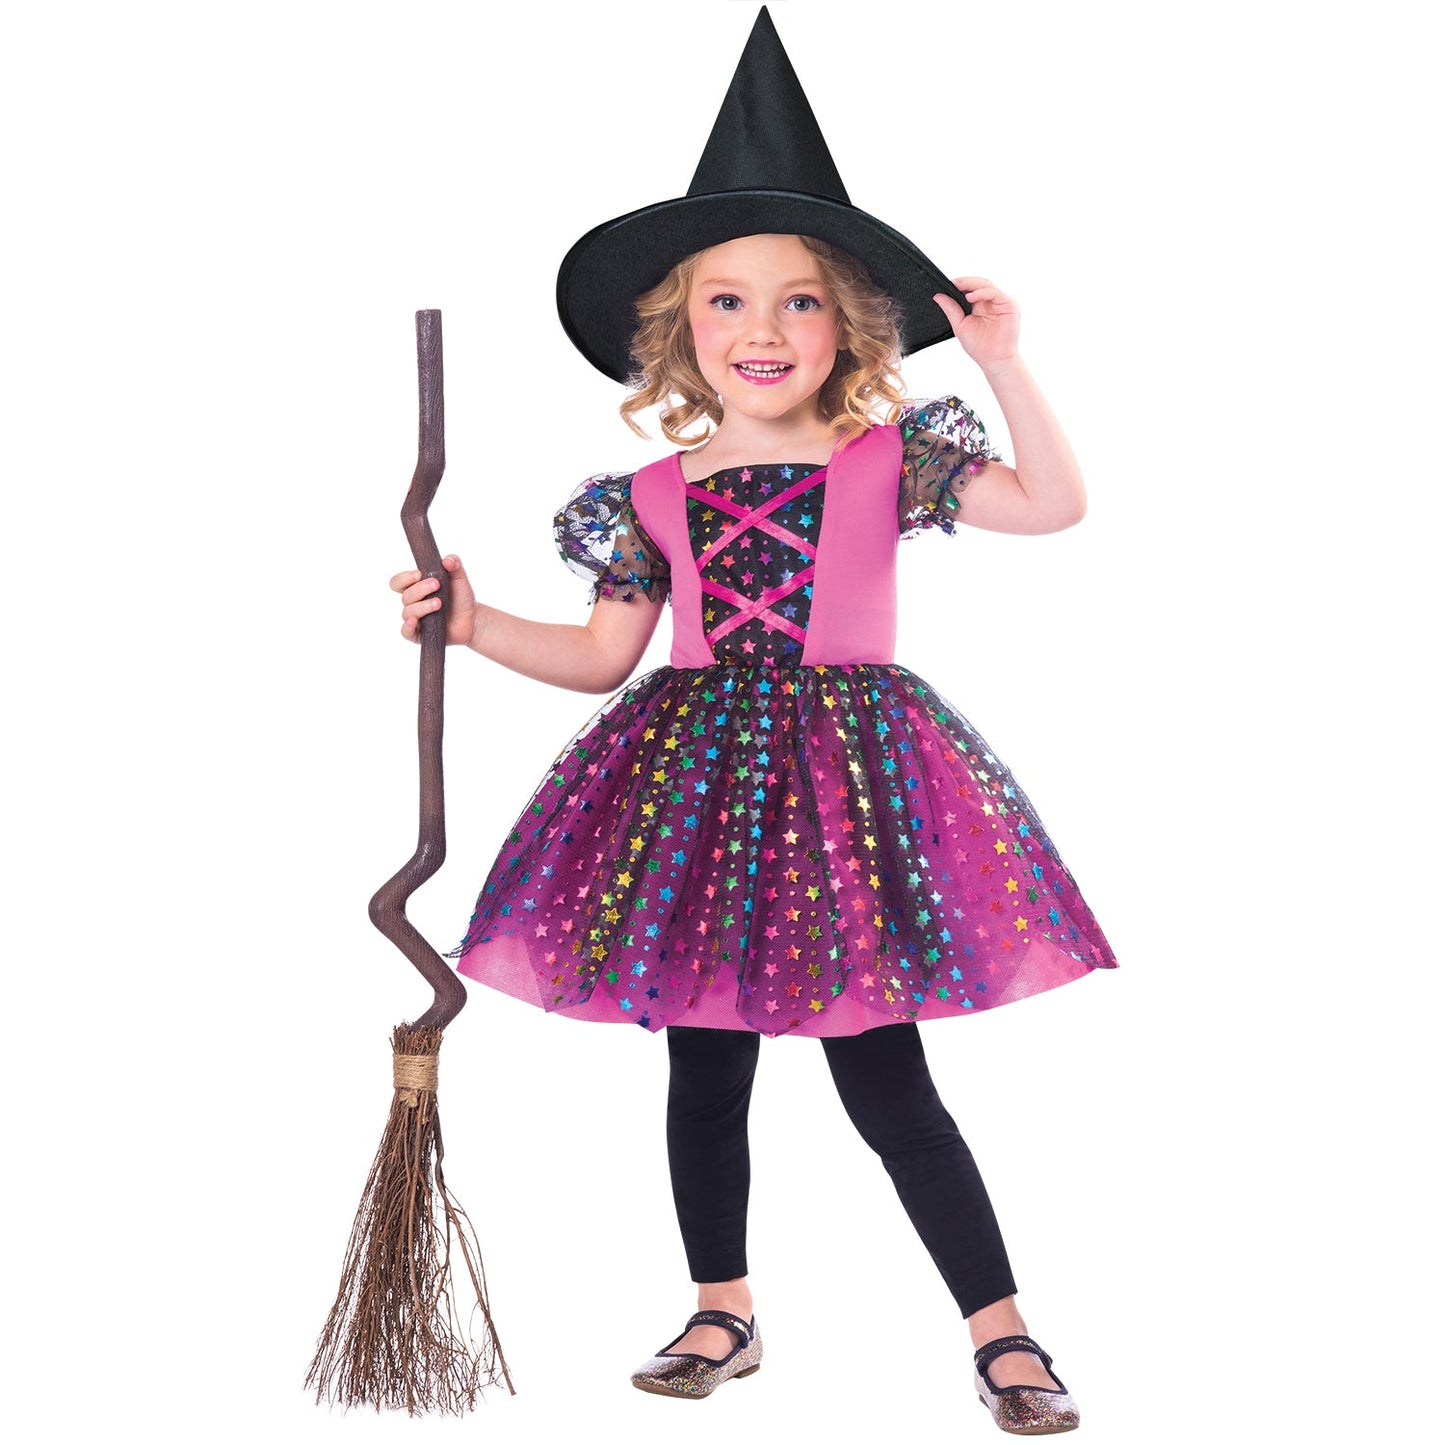 Girls Rainbow Witch Halloween Costume includes dress and hat